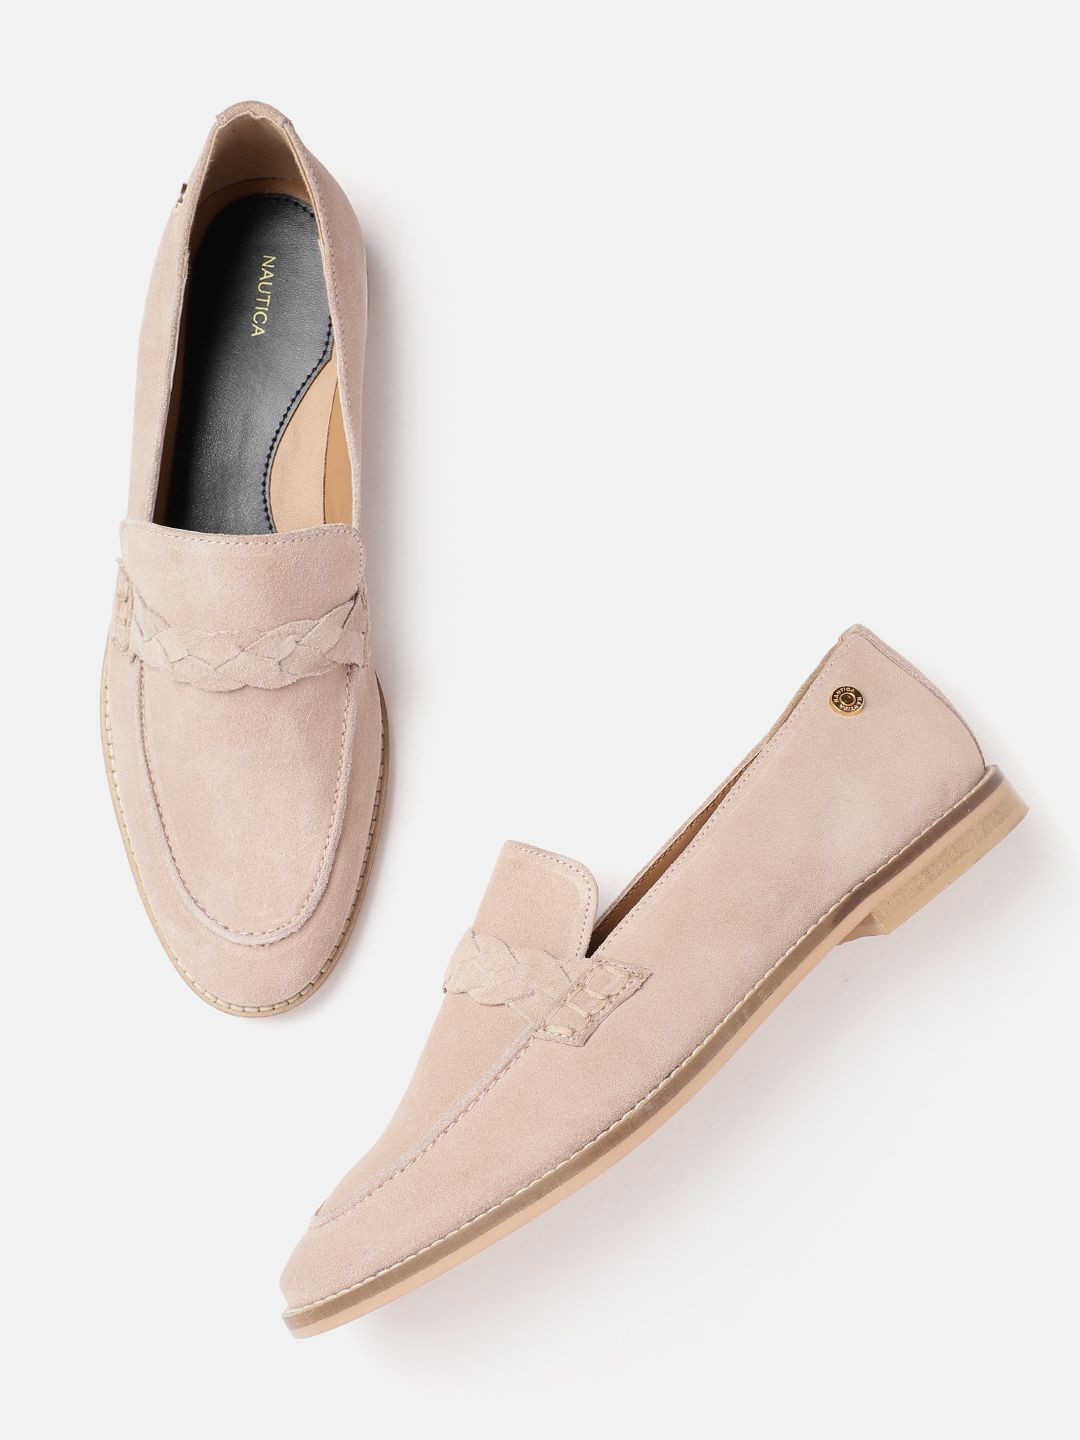 Nautica Women Loafers with Braided Detail Price in India